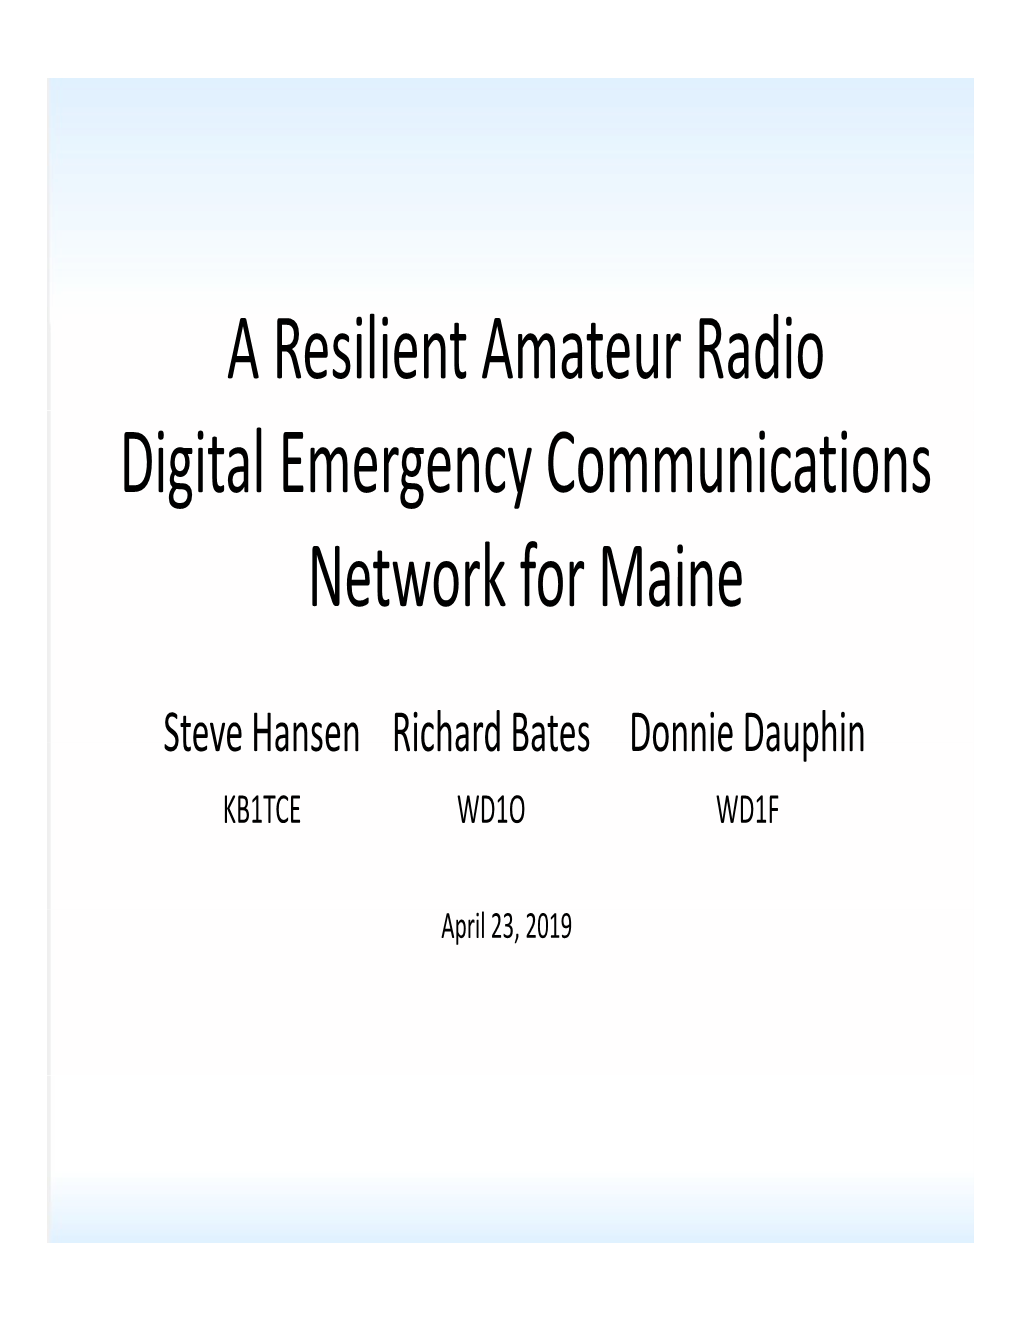 A Resilient Amateur Radio Digital Emergency Communications Network for Maine